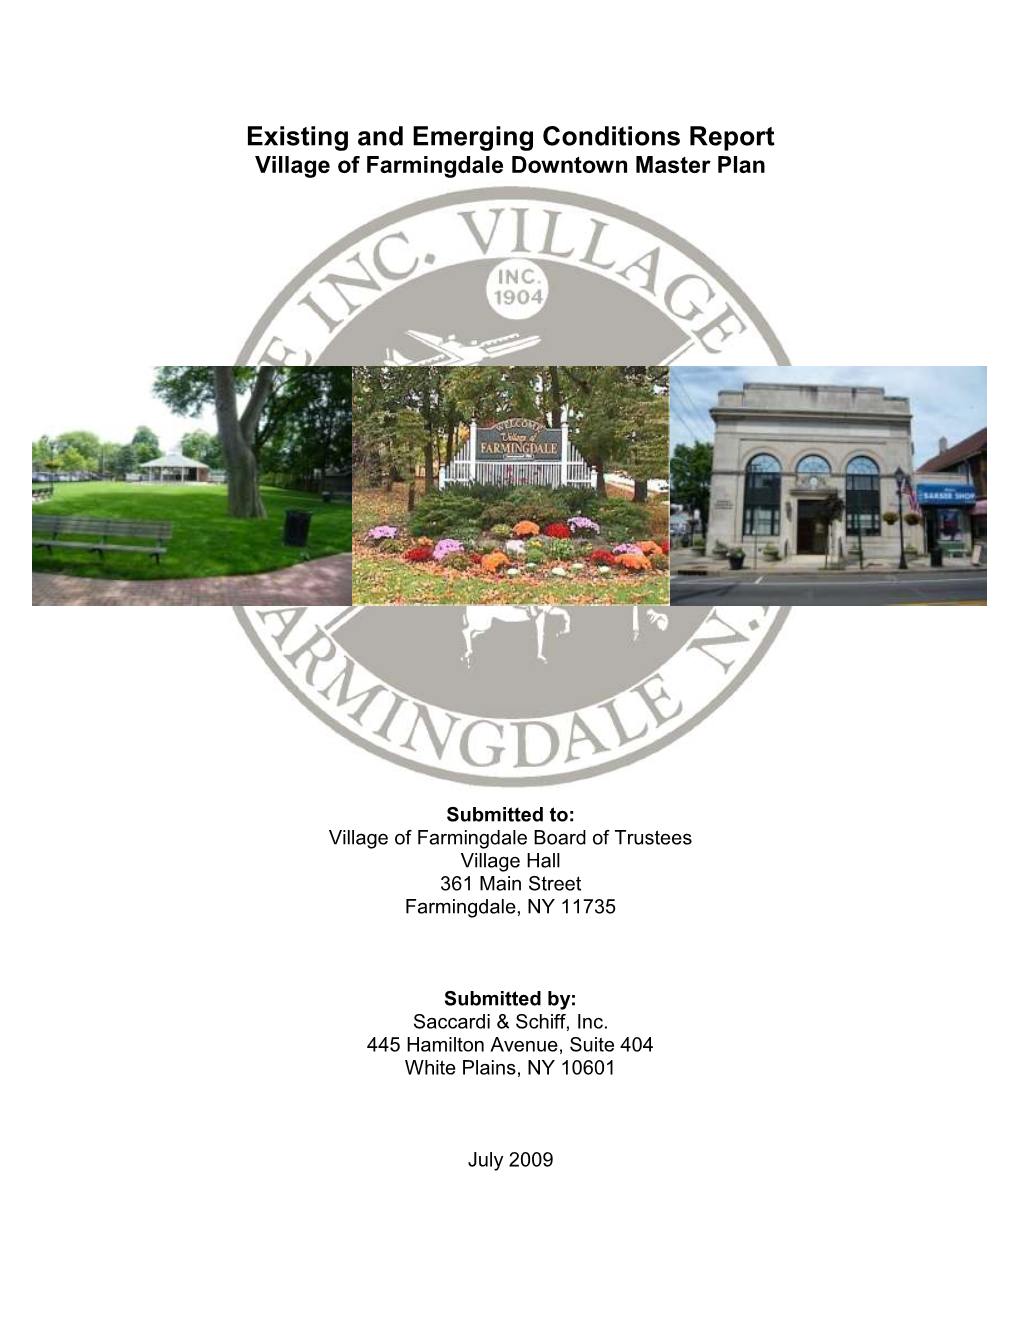 Existing and Emerging Conditions Report Village of Farmingdale Downtown Master Plan